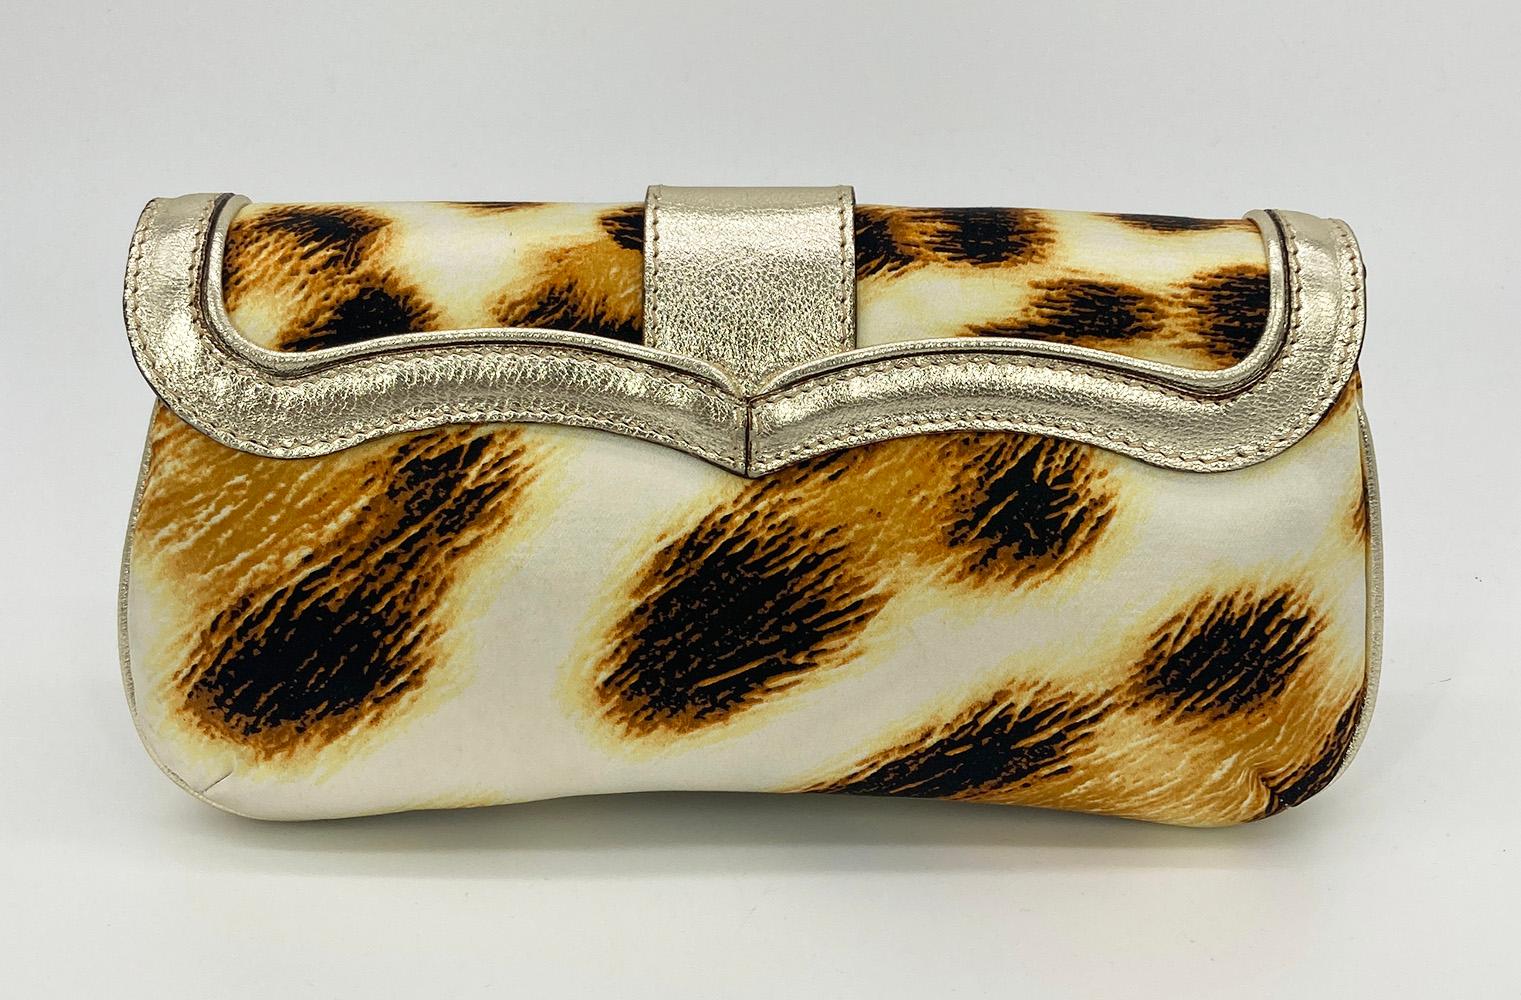 Vintage Roberto Cavalli Leopard Print Silk Sunflower Clutch Baguette in excellent condition. Leopard print silk trimmed with gold leather and brass hardware. Front snap flap closure opens to a gold leather and tan microsuede lined interior with one